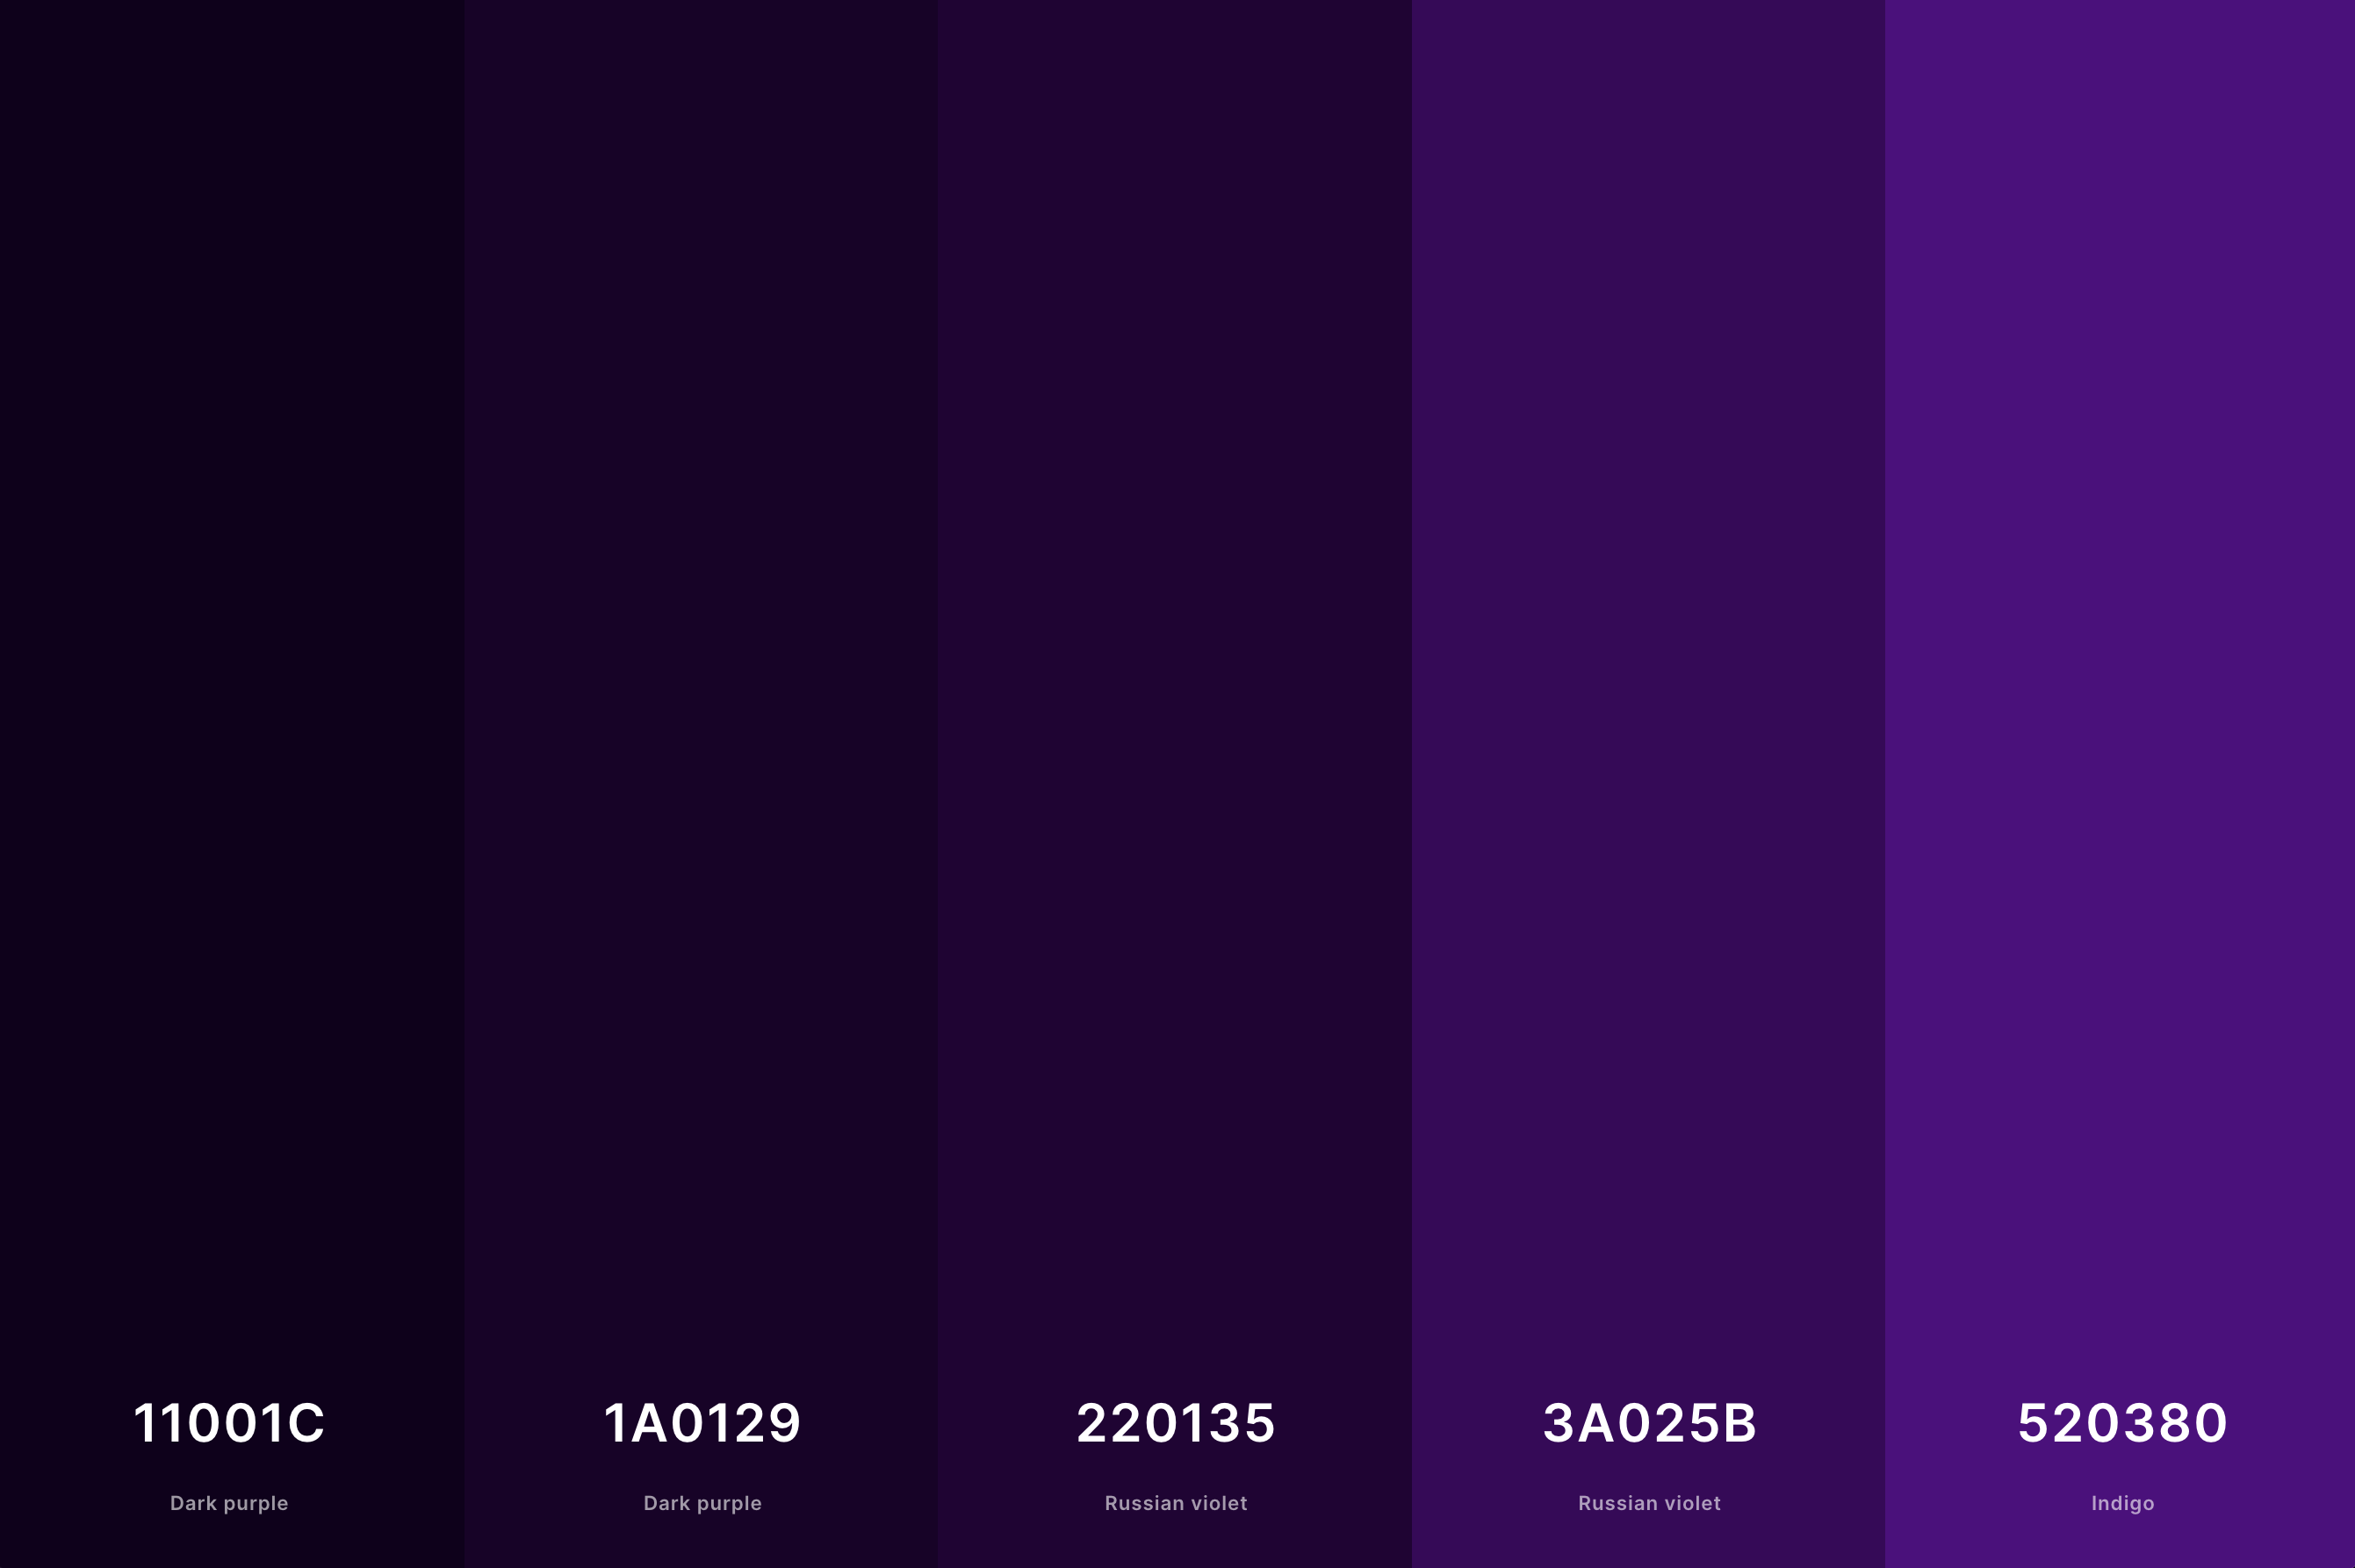 3. Dark Purple Color Palette Color Palette with Dark Purple (Hex #11001C) + Dark Purple (Hex #1A0129) + Russian Violet (Hex #220135) + Russian Violet (Hex #3A025B) + Indigo (Hex #520380) Color Palette with Hex Codes